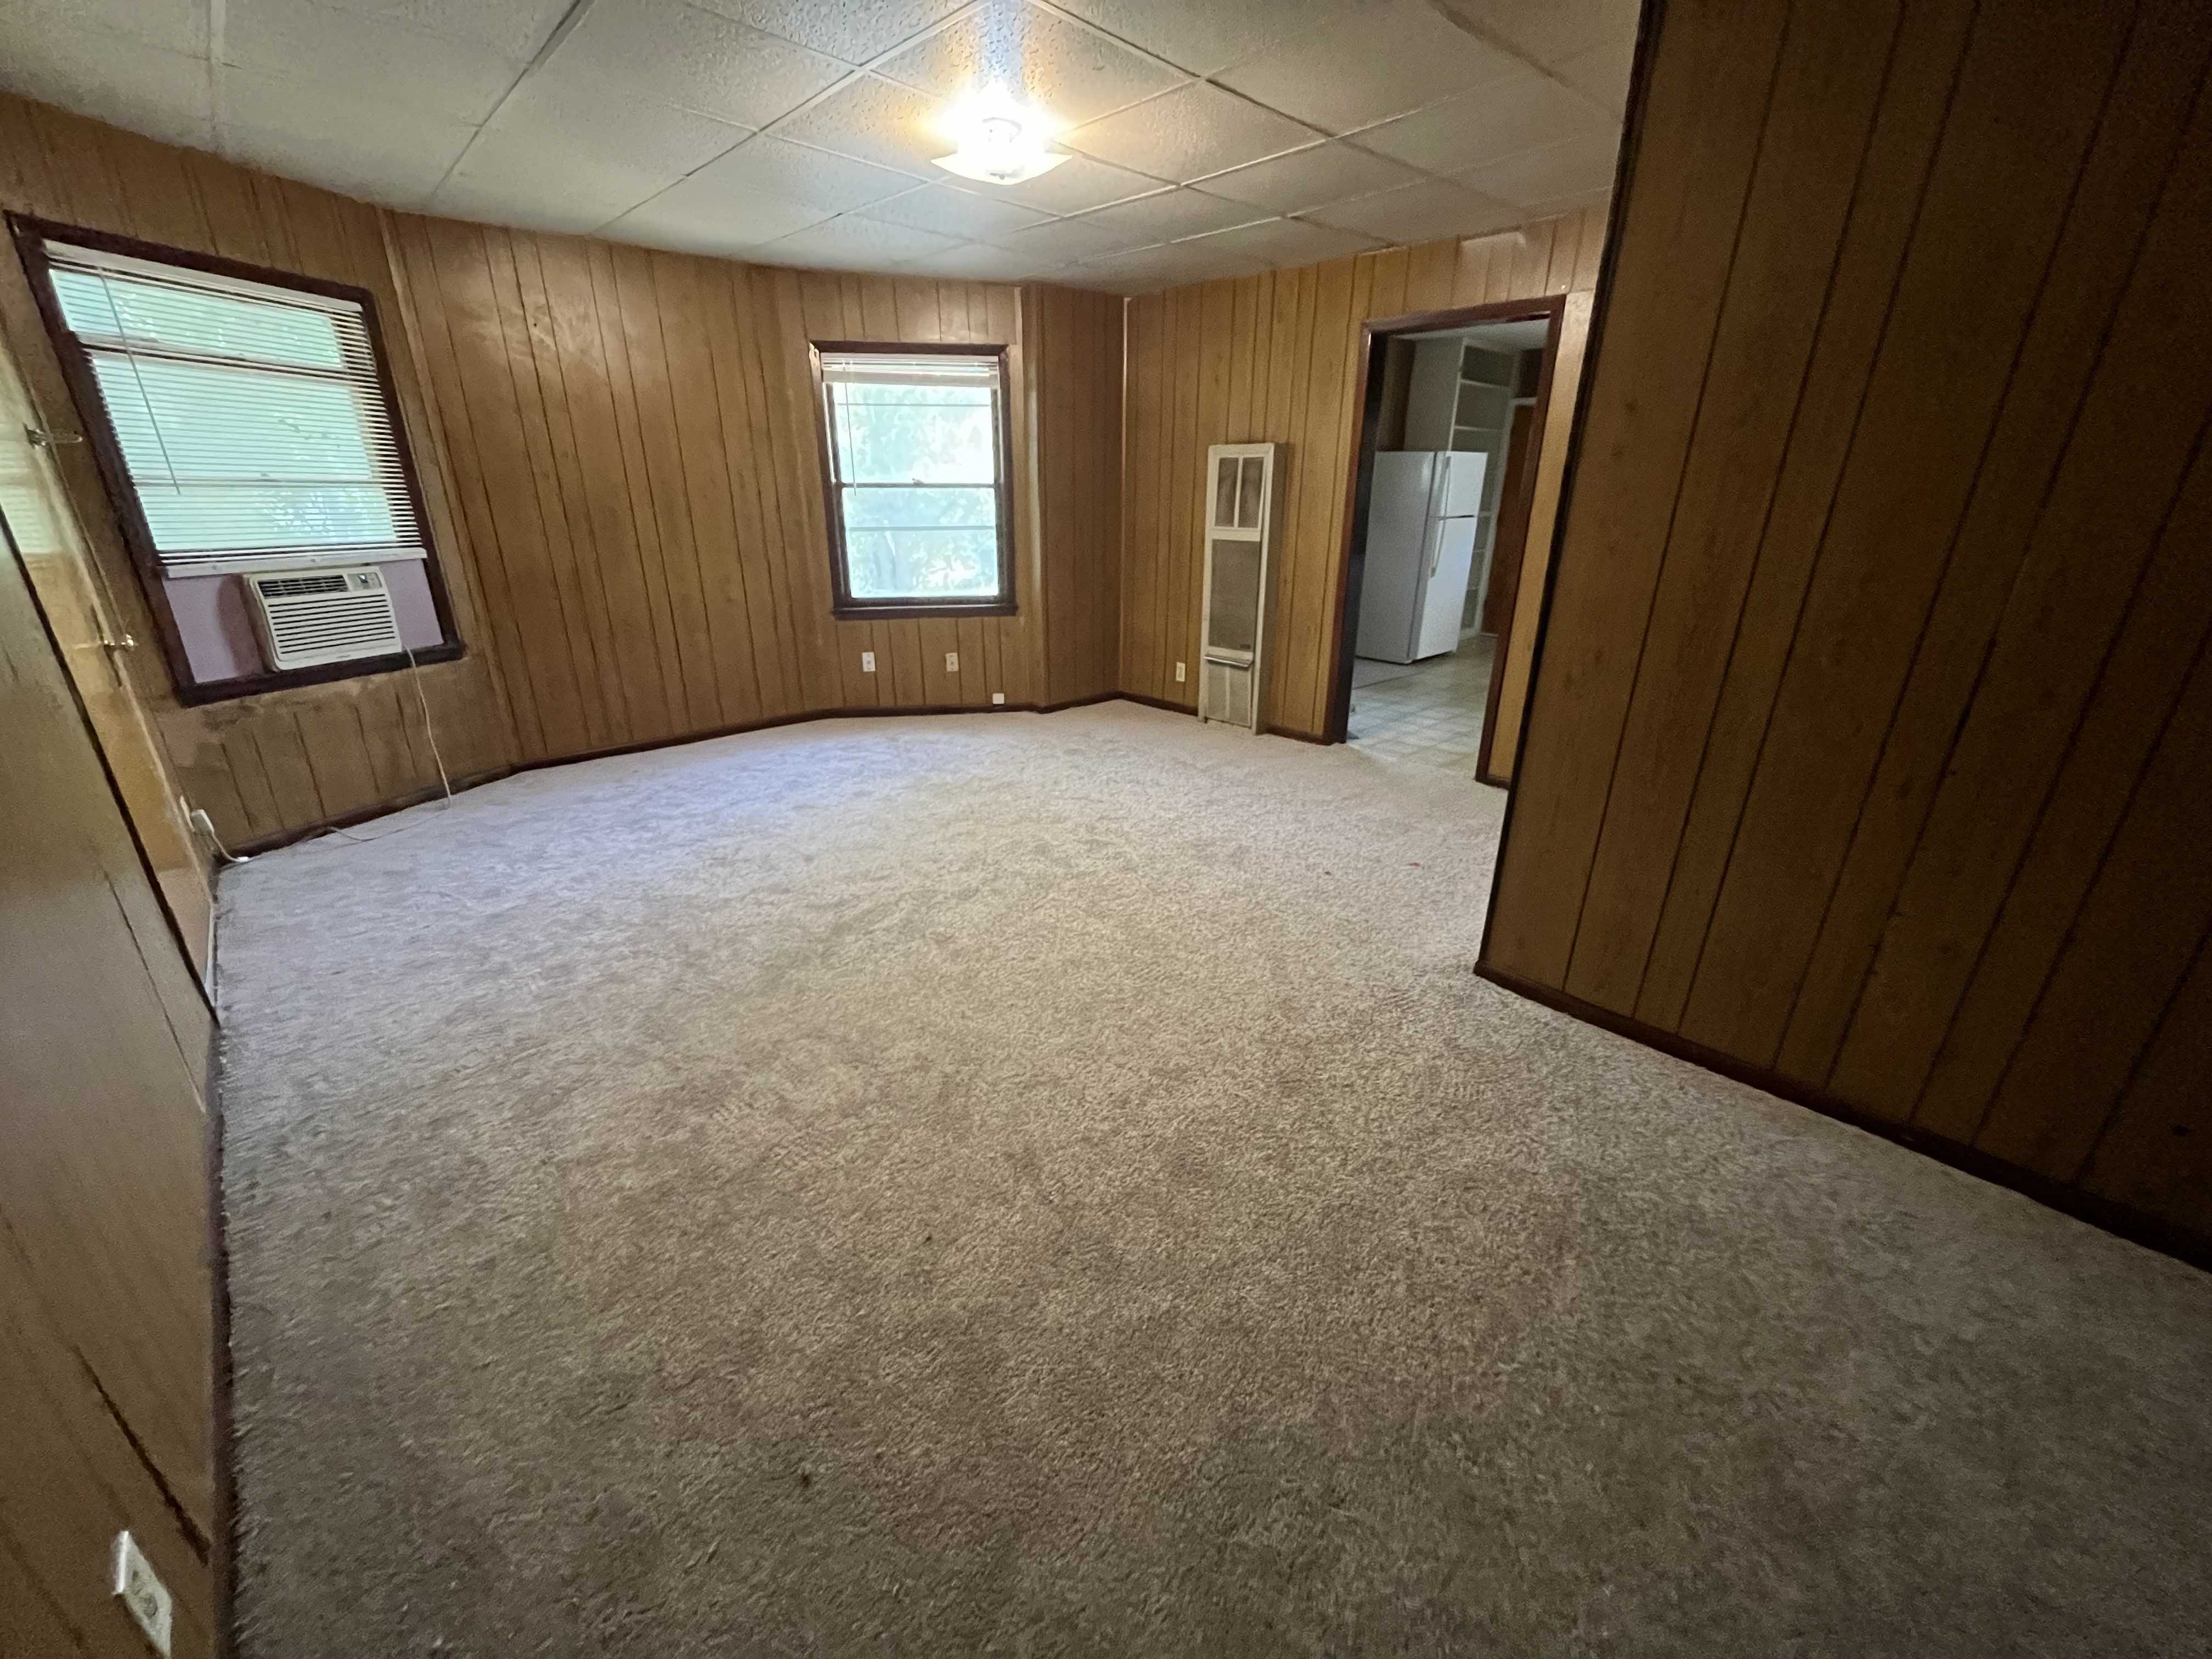 739 S. Crawford, Fort Scott, Bourbon County, Kansas, United States 66701, 1 Bedroom Bedrooms, ,1 BathroomBathrooms,Apartment,For Rent,S. Crawford,2,1025